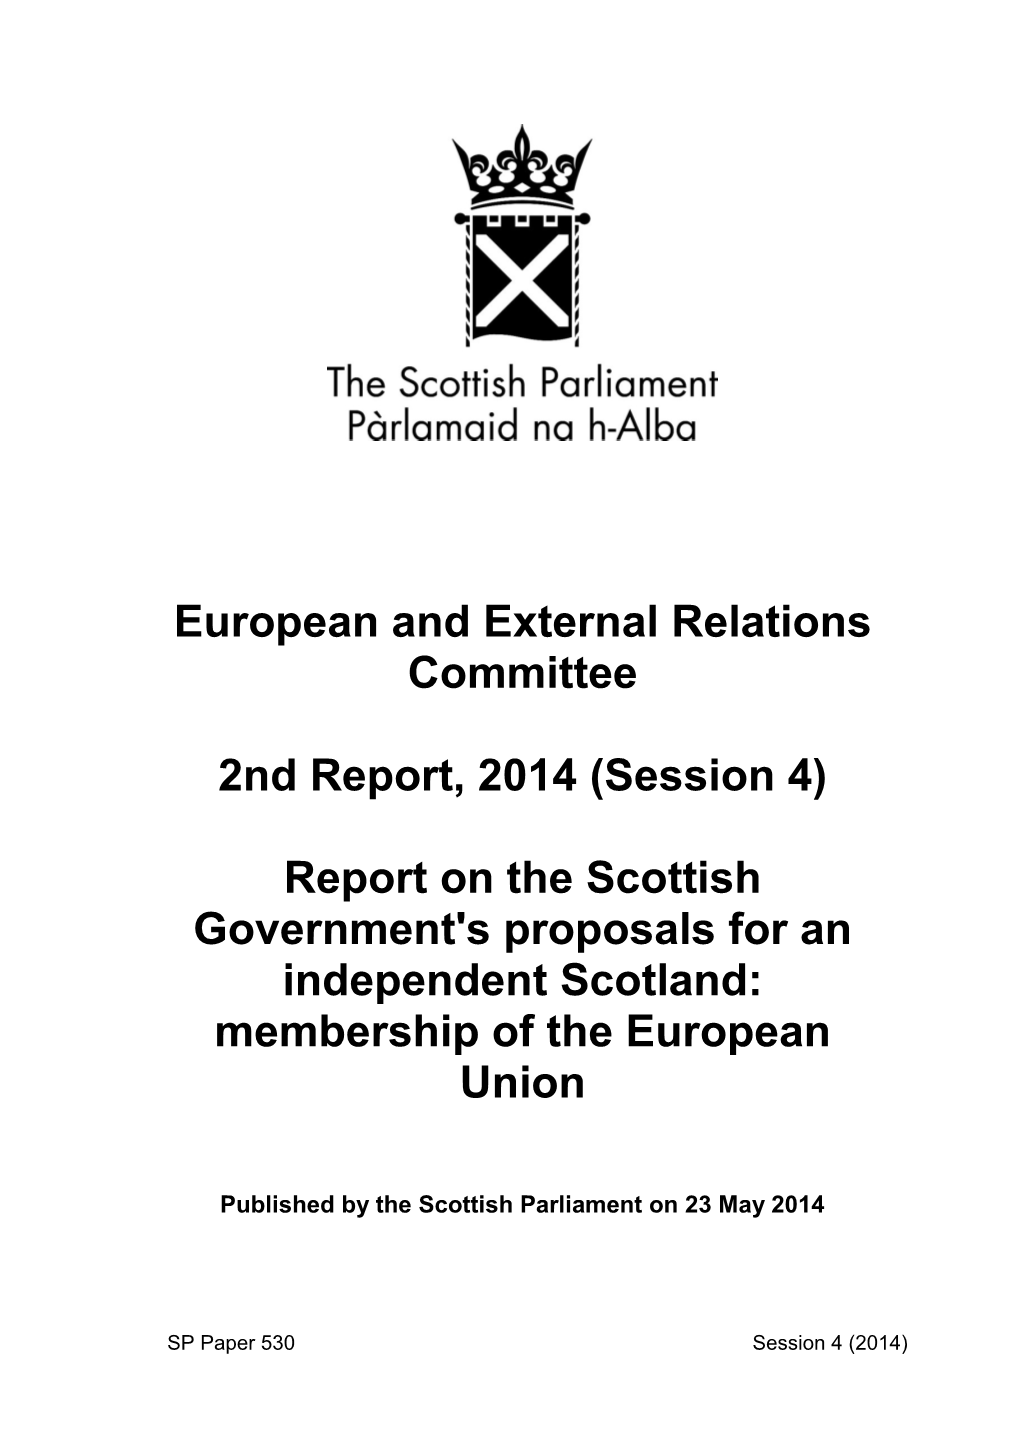 Report on the Scottish Government's Proposals for an Independent Scotland: Membership of the European Union